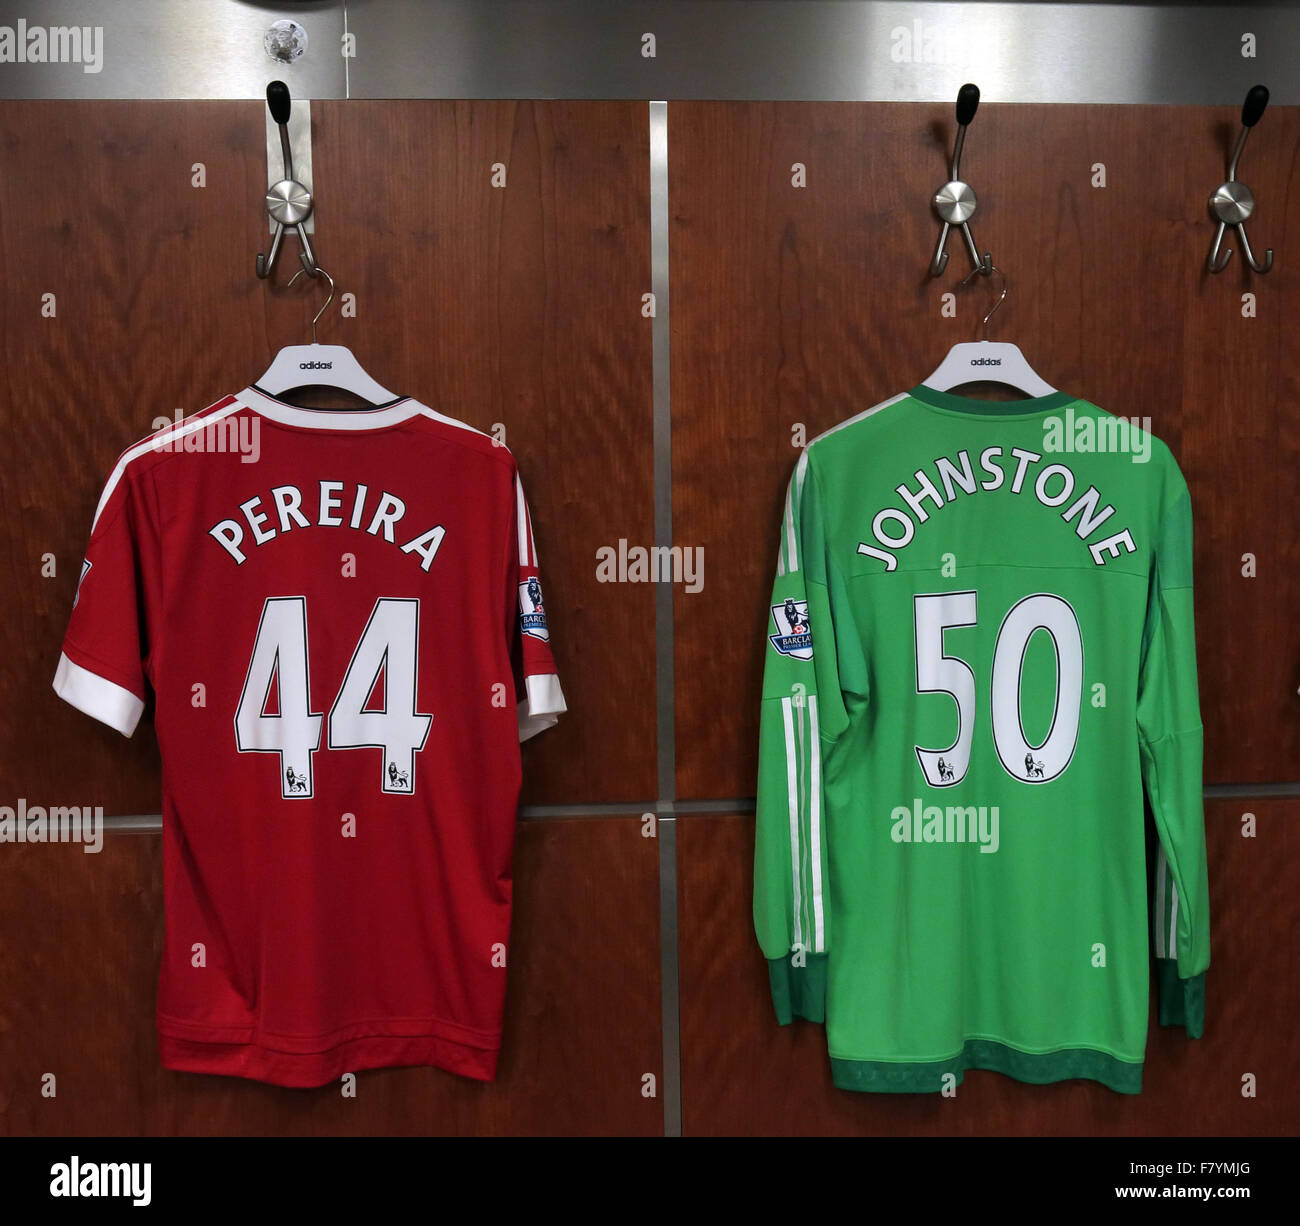 Pereira & Johnstone players shirts,in MUFC dressing room, Old Trafford, Manchester, England Stock Photo